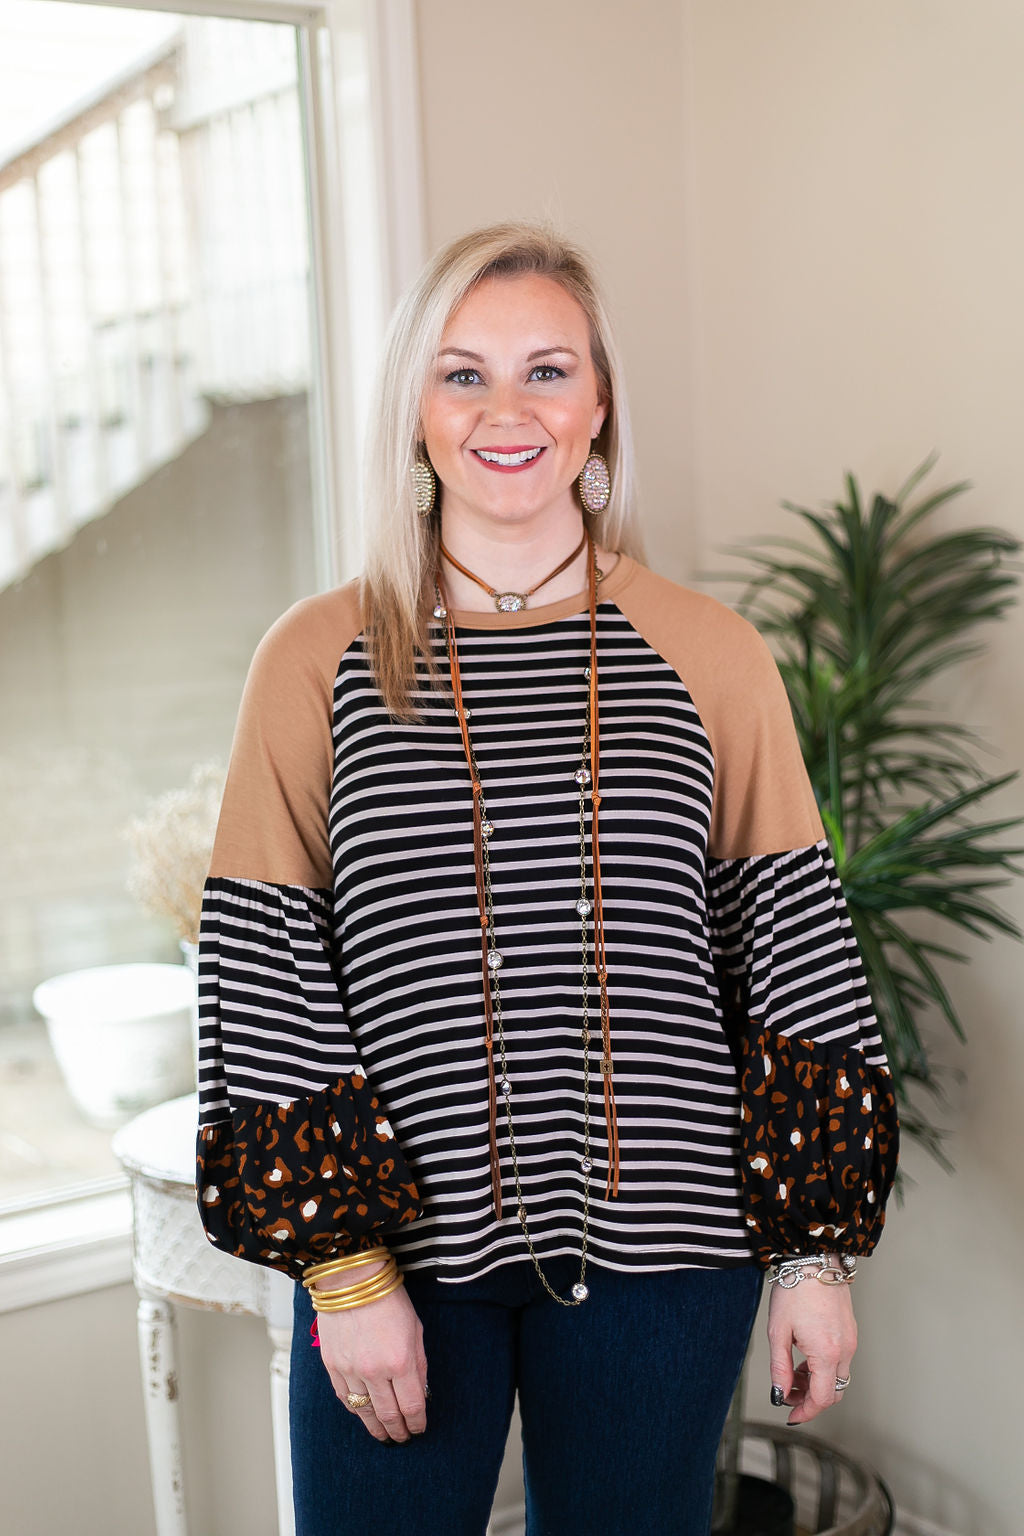 No Looking Back Striped Top with Multi Print Puff Sleeves in Black and Tan - Giddy Up Glamour Boutique